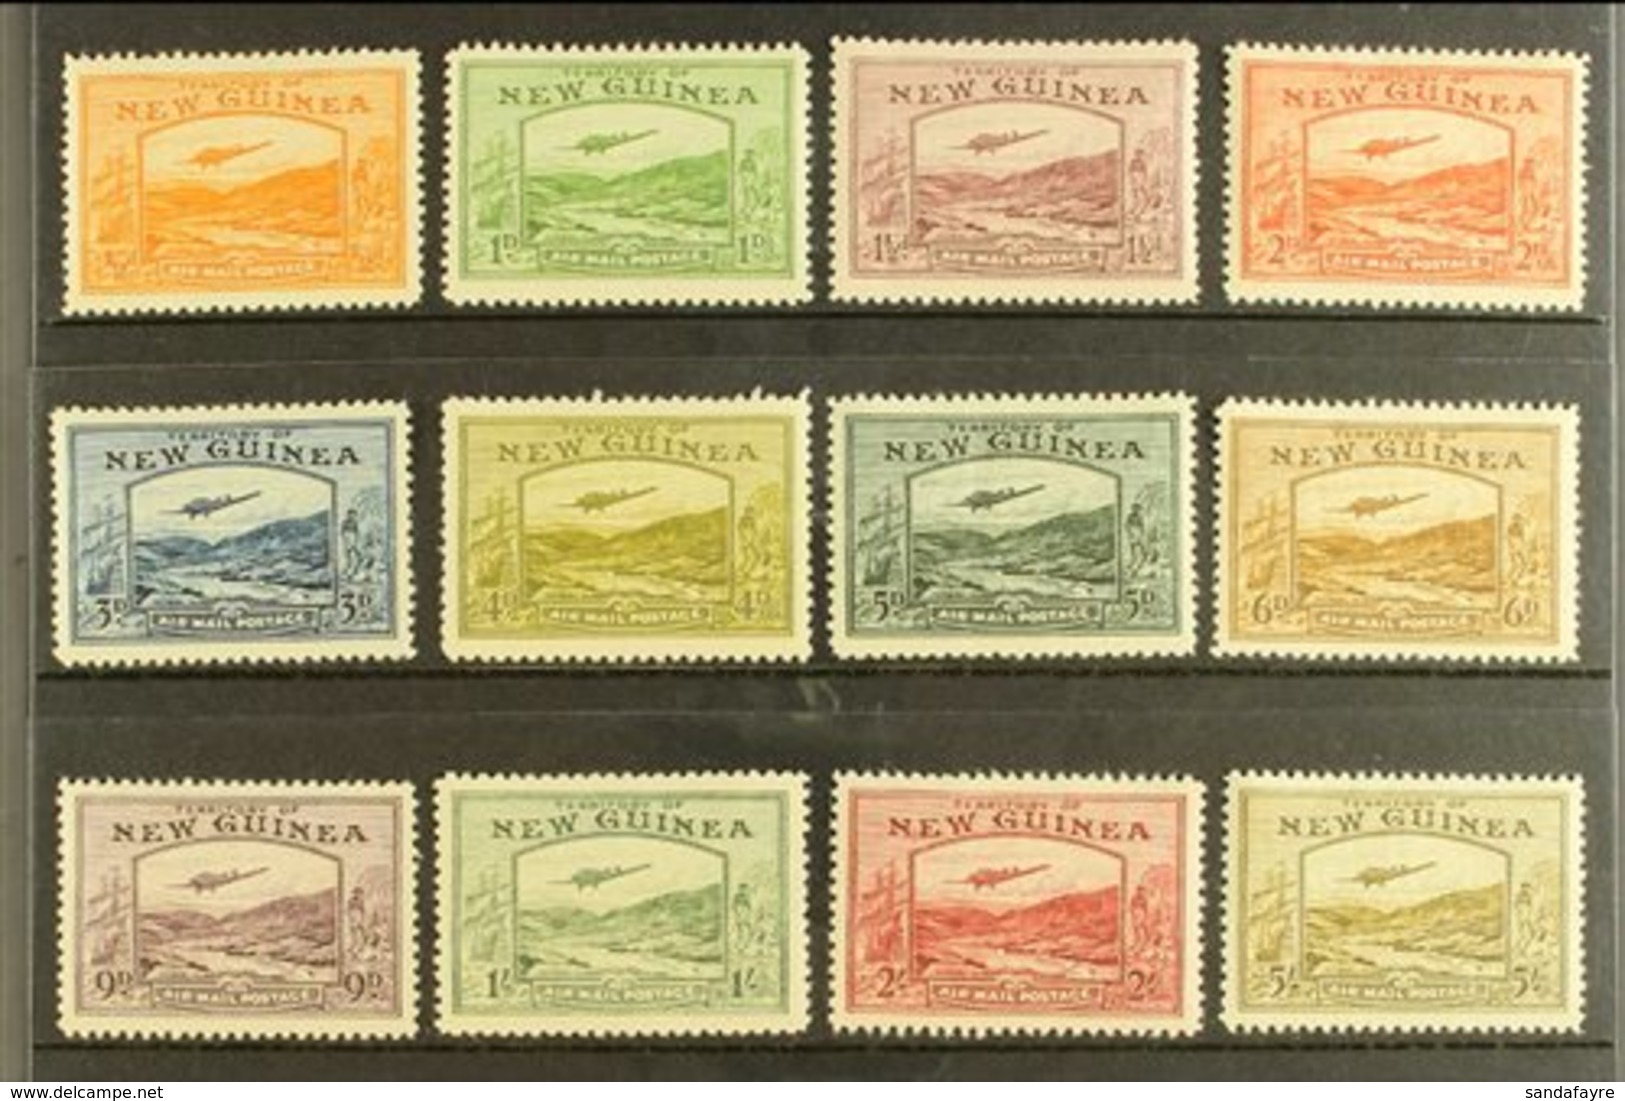 1939 Bulolo Goldfields Air Set Complete From ½d To 5s, SG 212/223, Very Fine Mint. (12 Stamps) For More Images, Please V - Papoea-Nieuw-Guinea